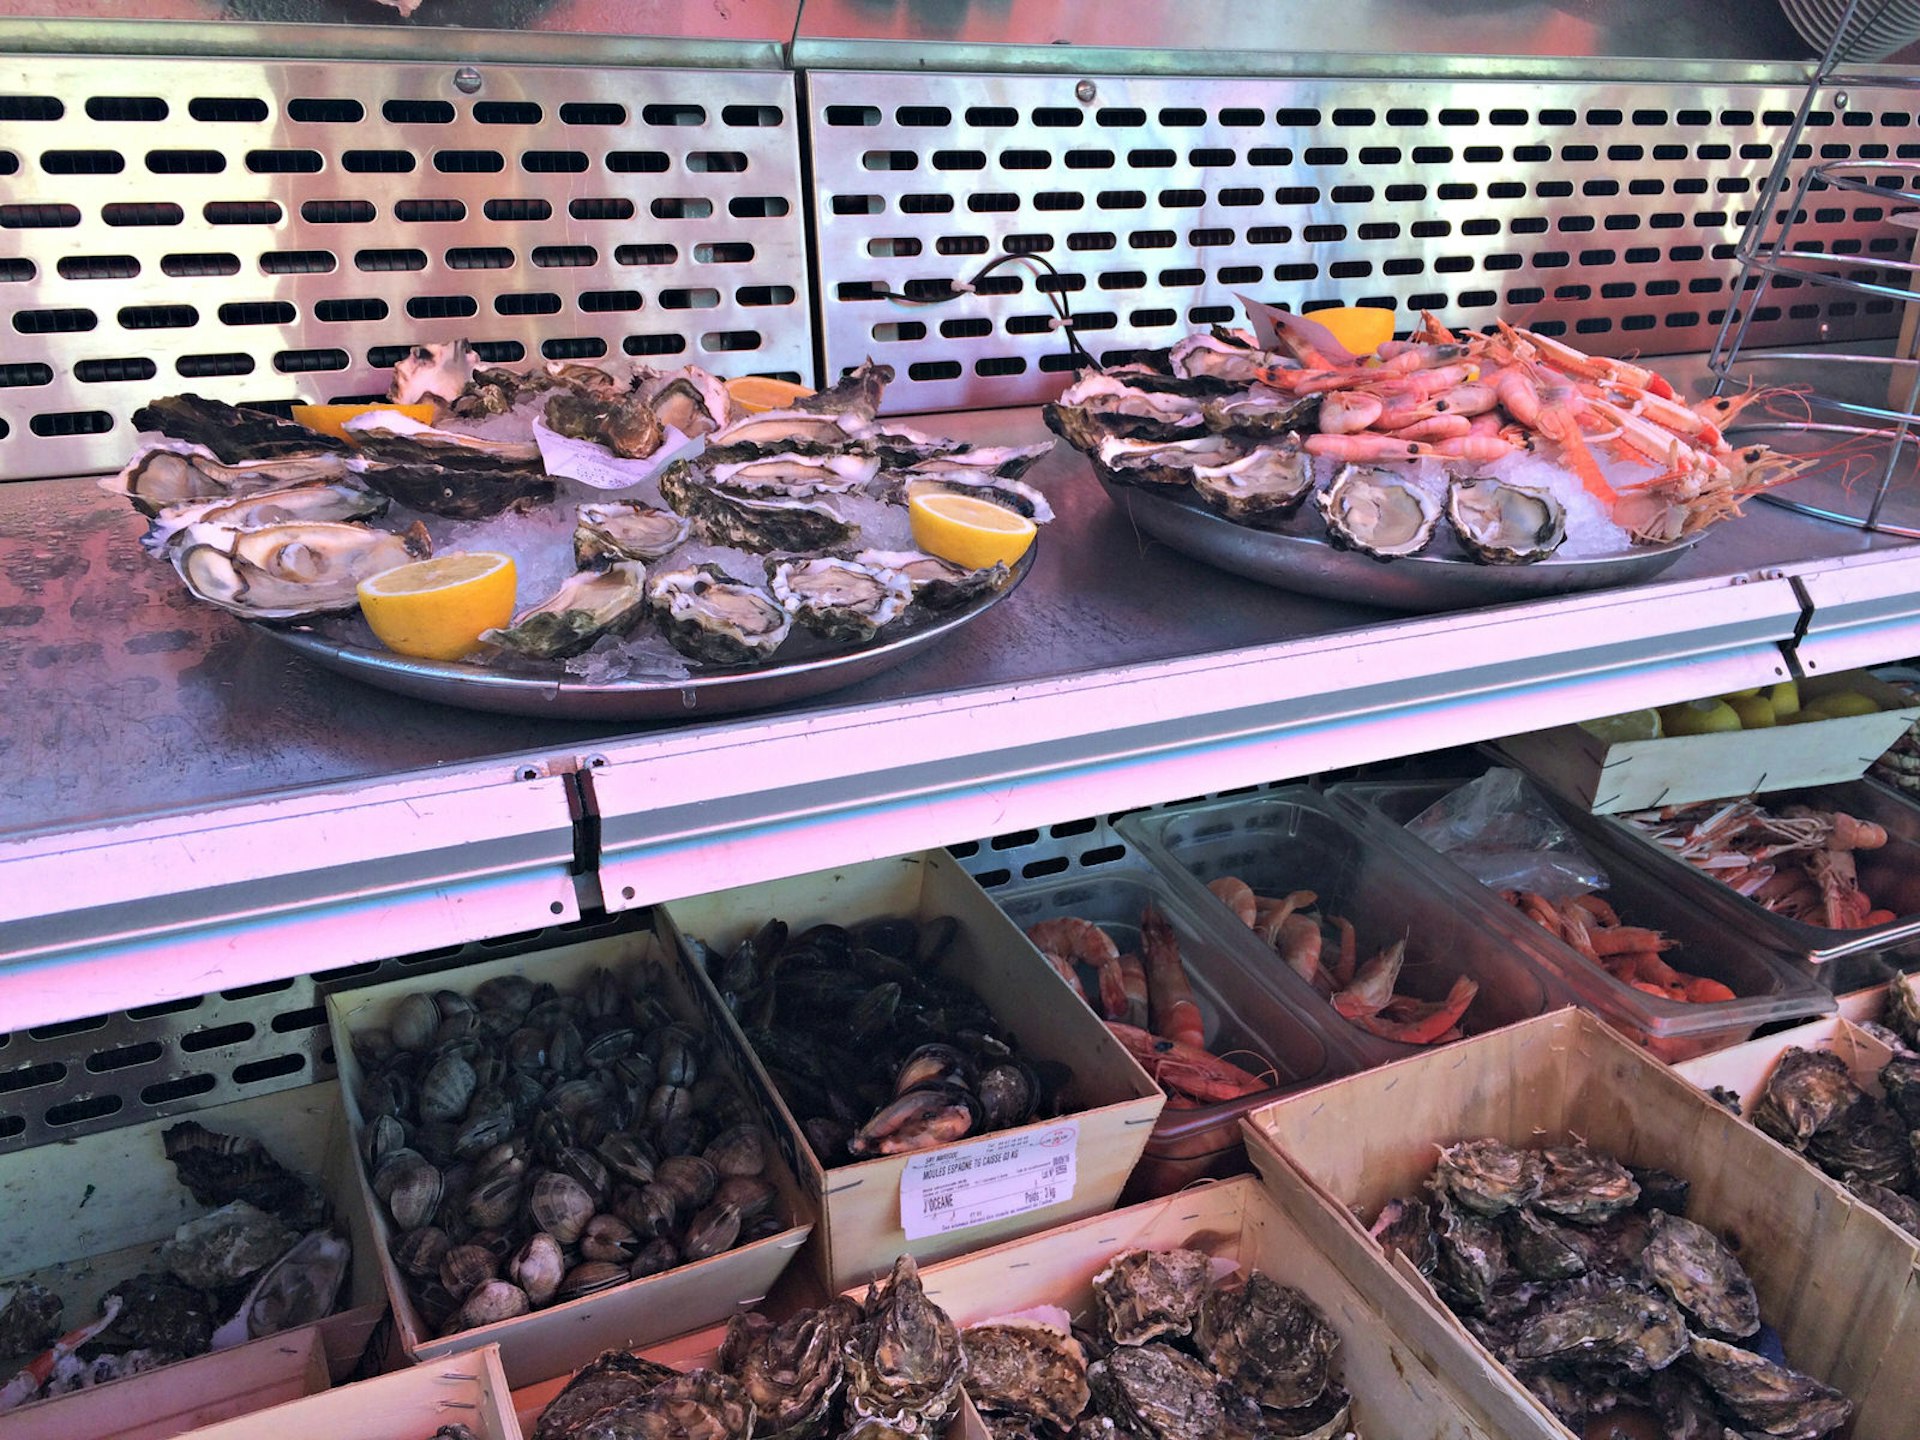 Seafood platters lined up at Brasseries Georges, Brussels © Charlotte McDonald-Gibson/Lonely Planet